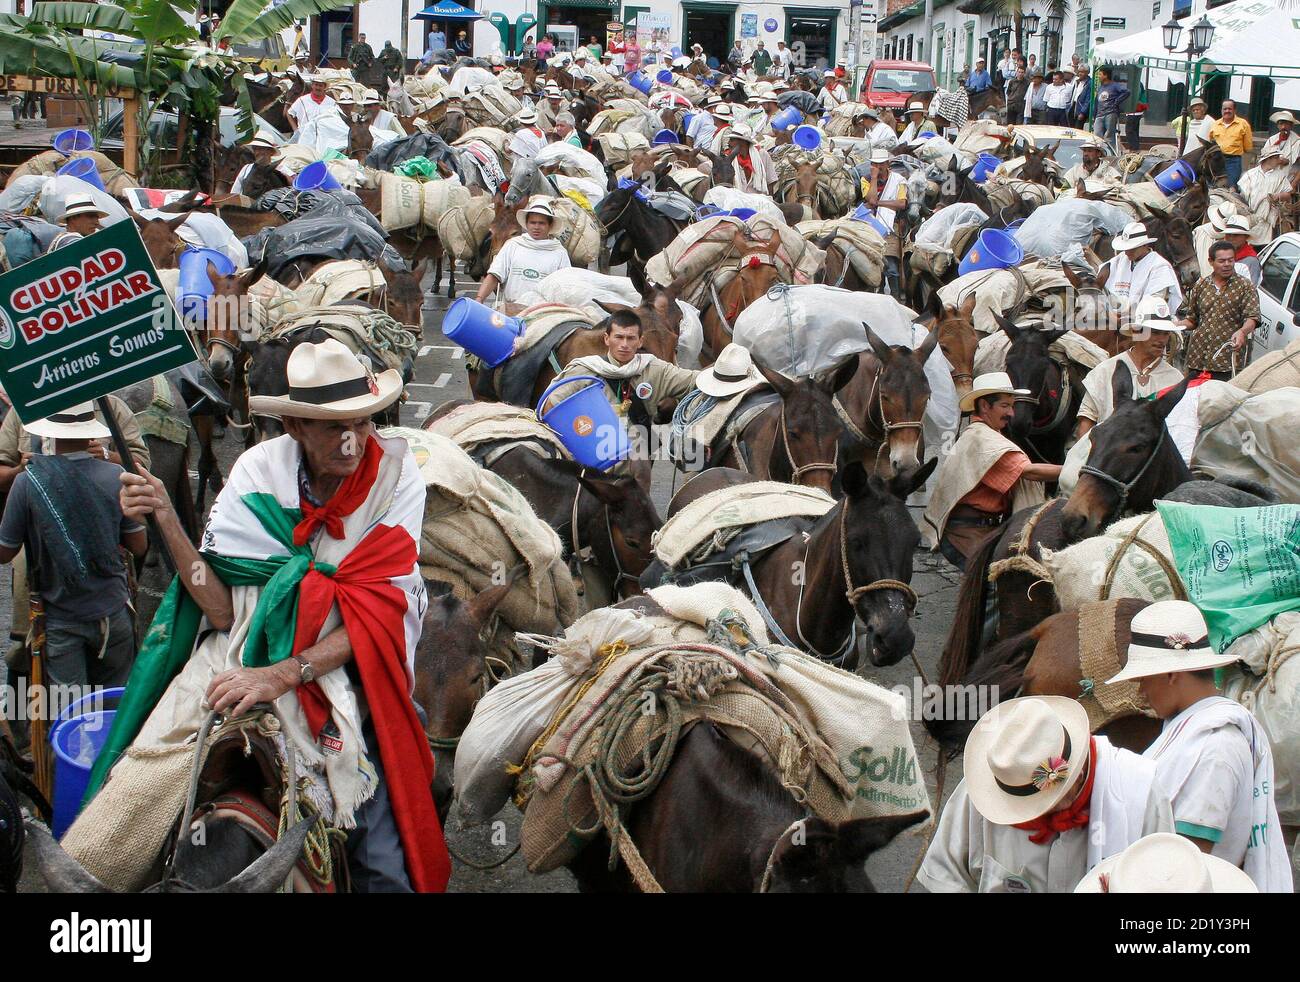 Colombian farmers called "Arrieros" walk with their mules along a street in  El Retiro May 18, 2007. Arrieros from all over the country travel to  Medellin each year, where they put on